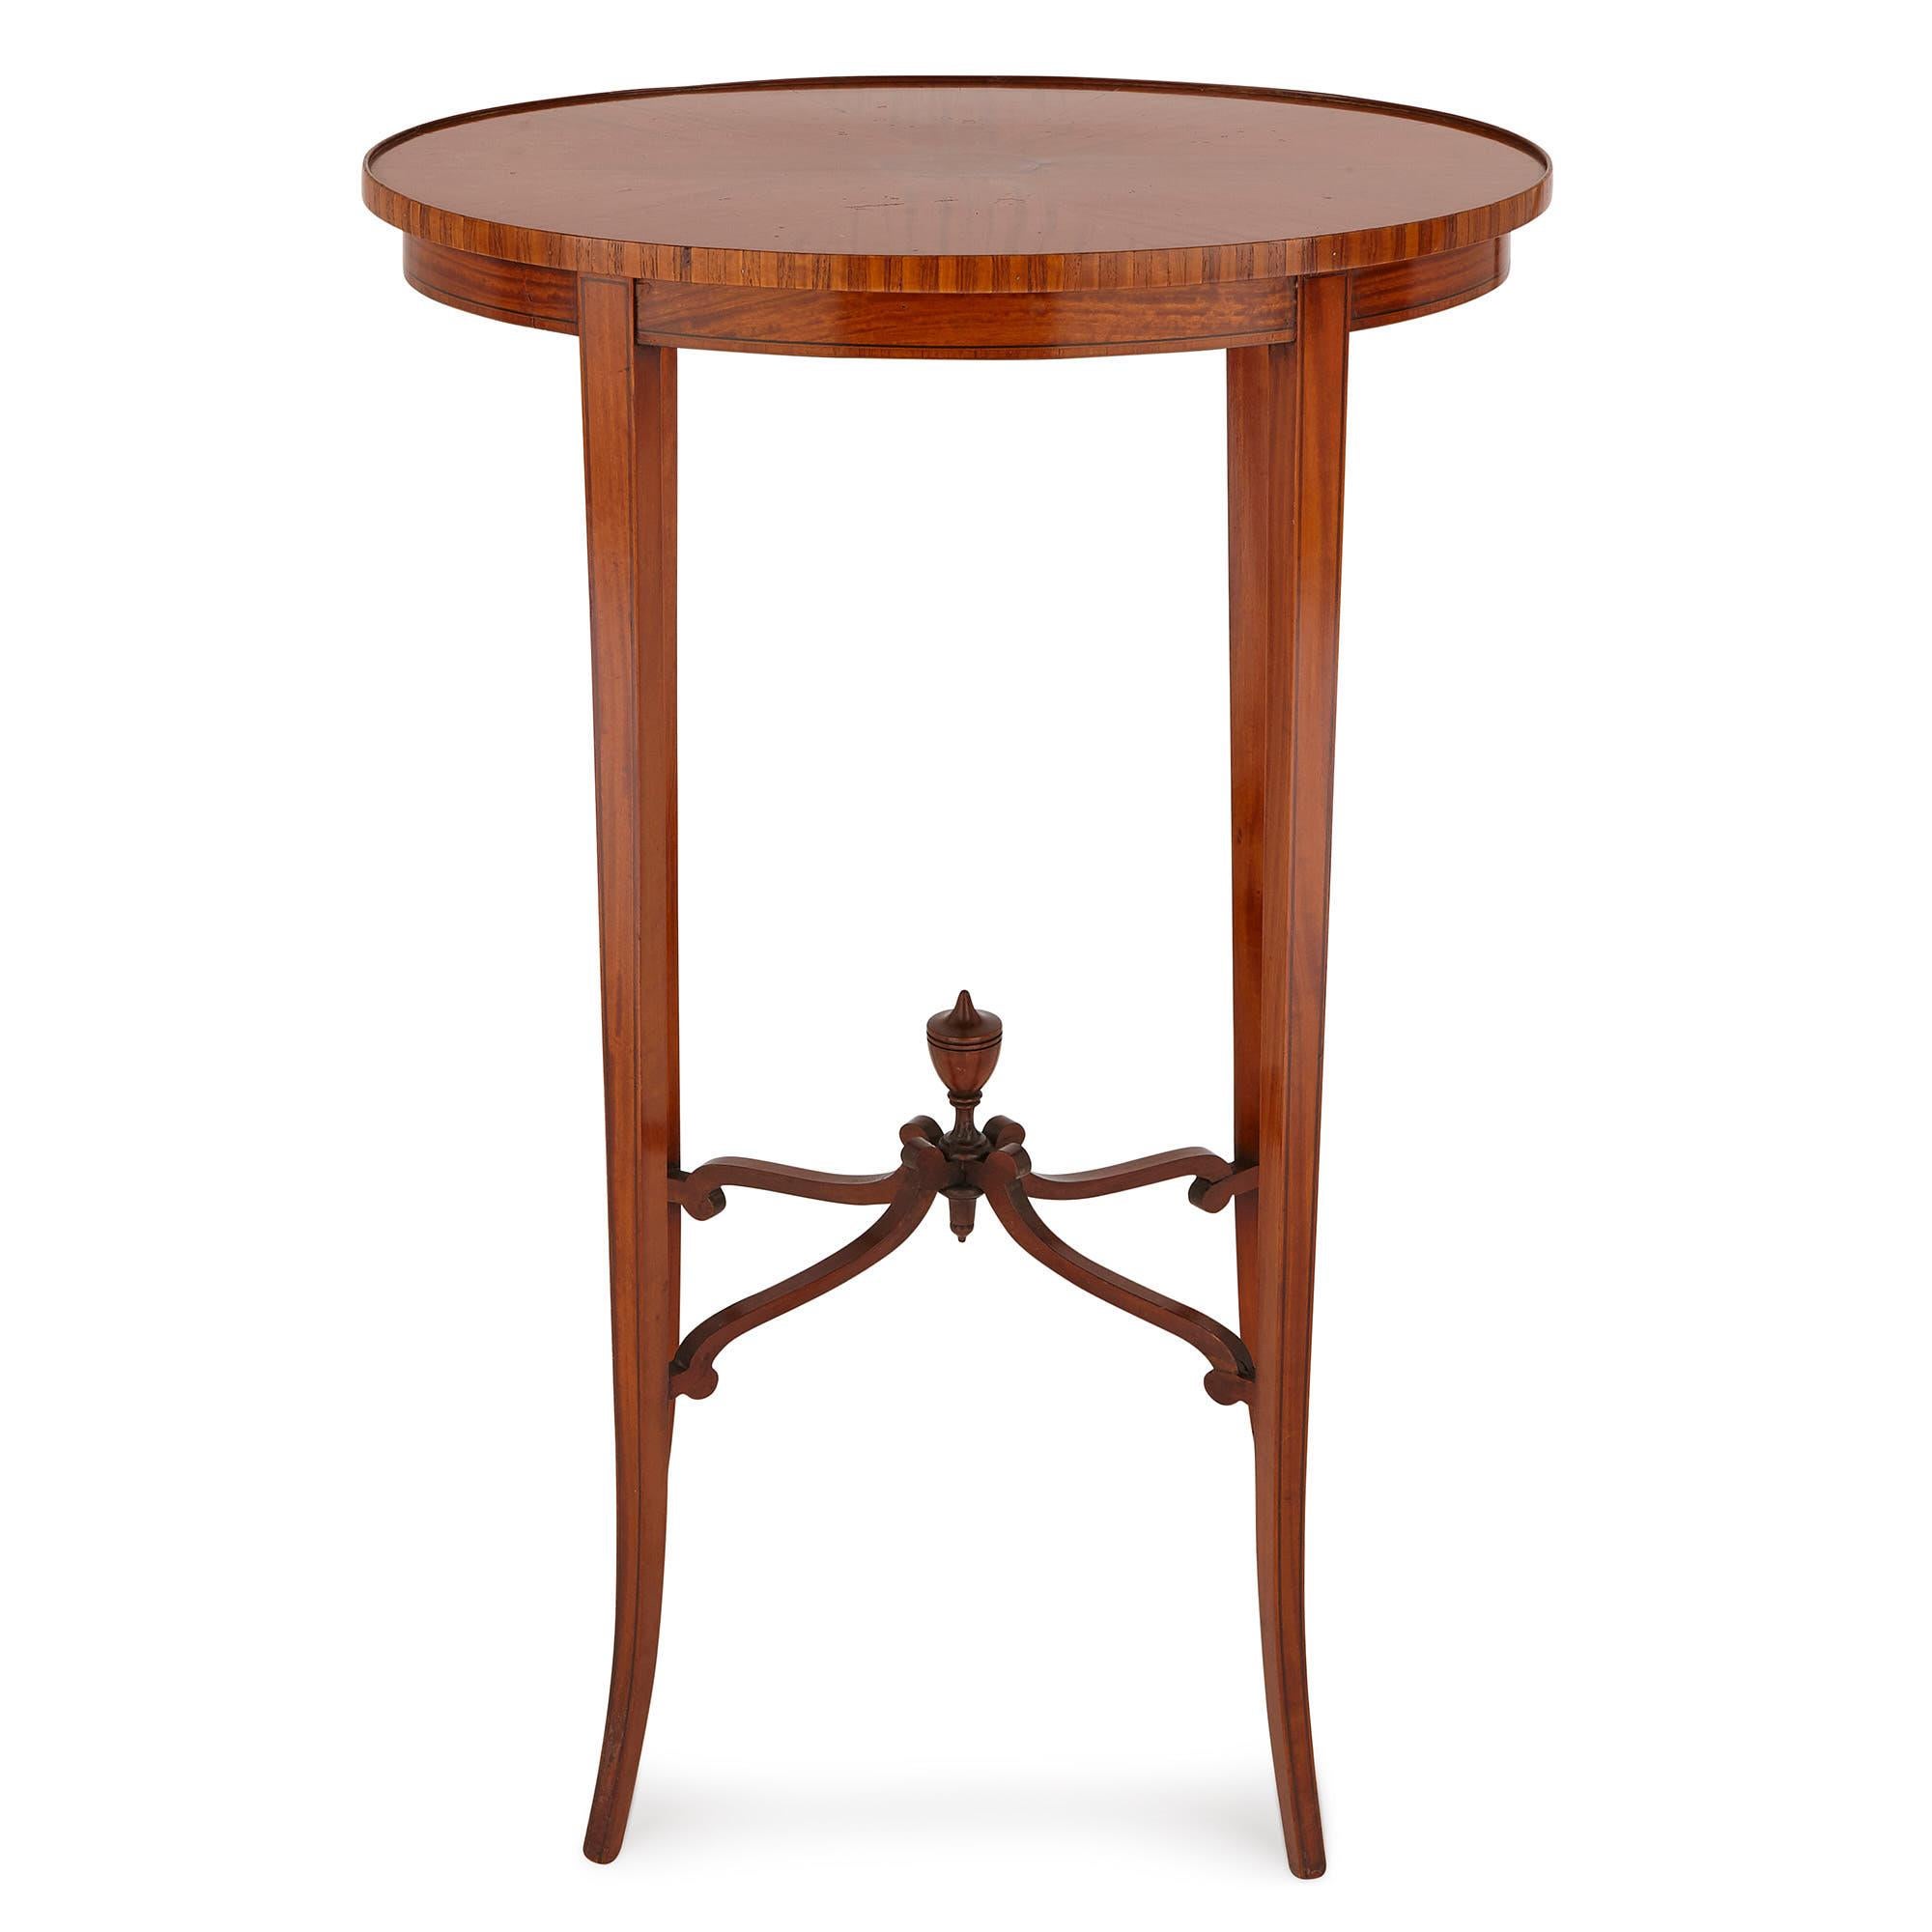 This table was created in England in the 19th century. It is crafted from satinwood, and is fitted with a mahogany stretcher. 

The table is comprised of an oval-shaped top, which features a parquetry design. The grain of the satinwood panels is